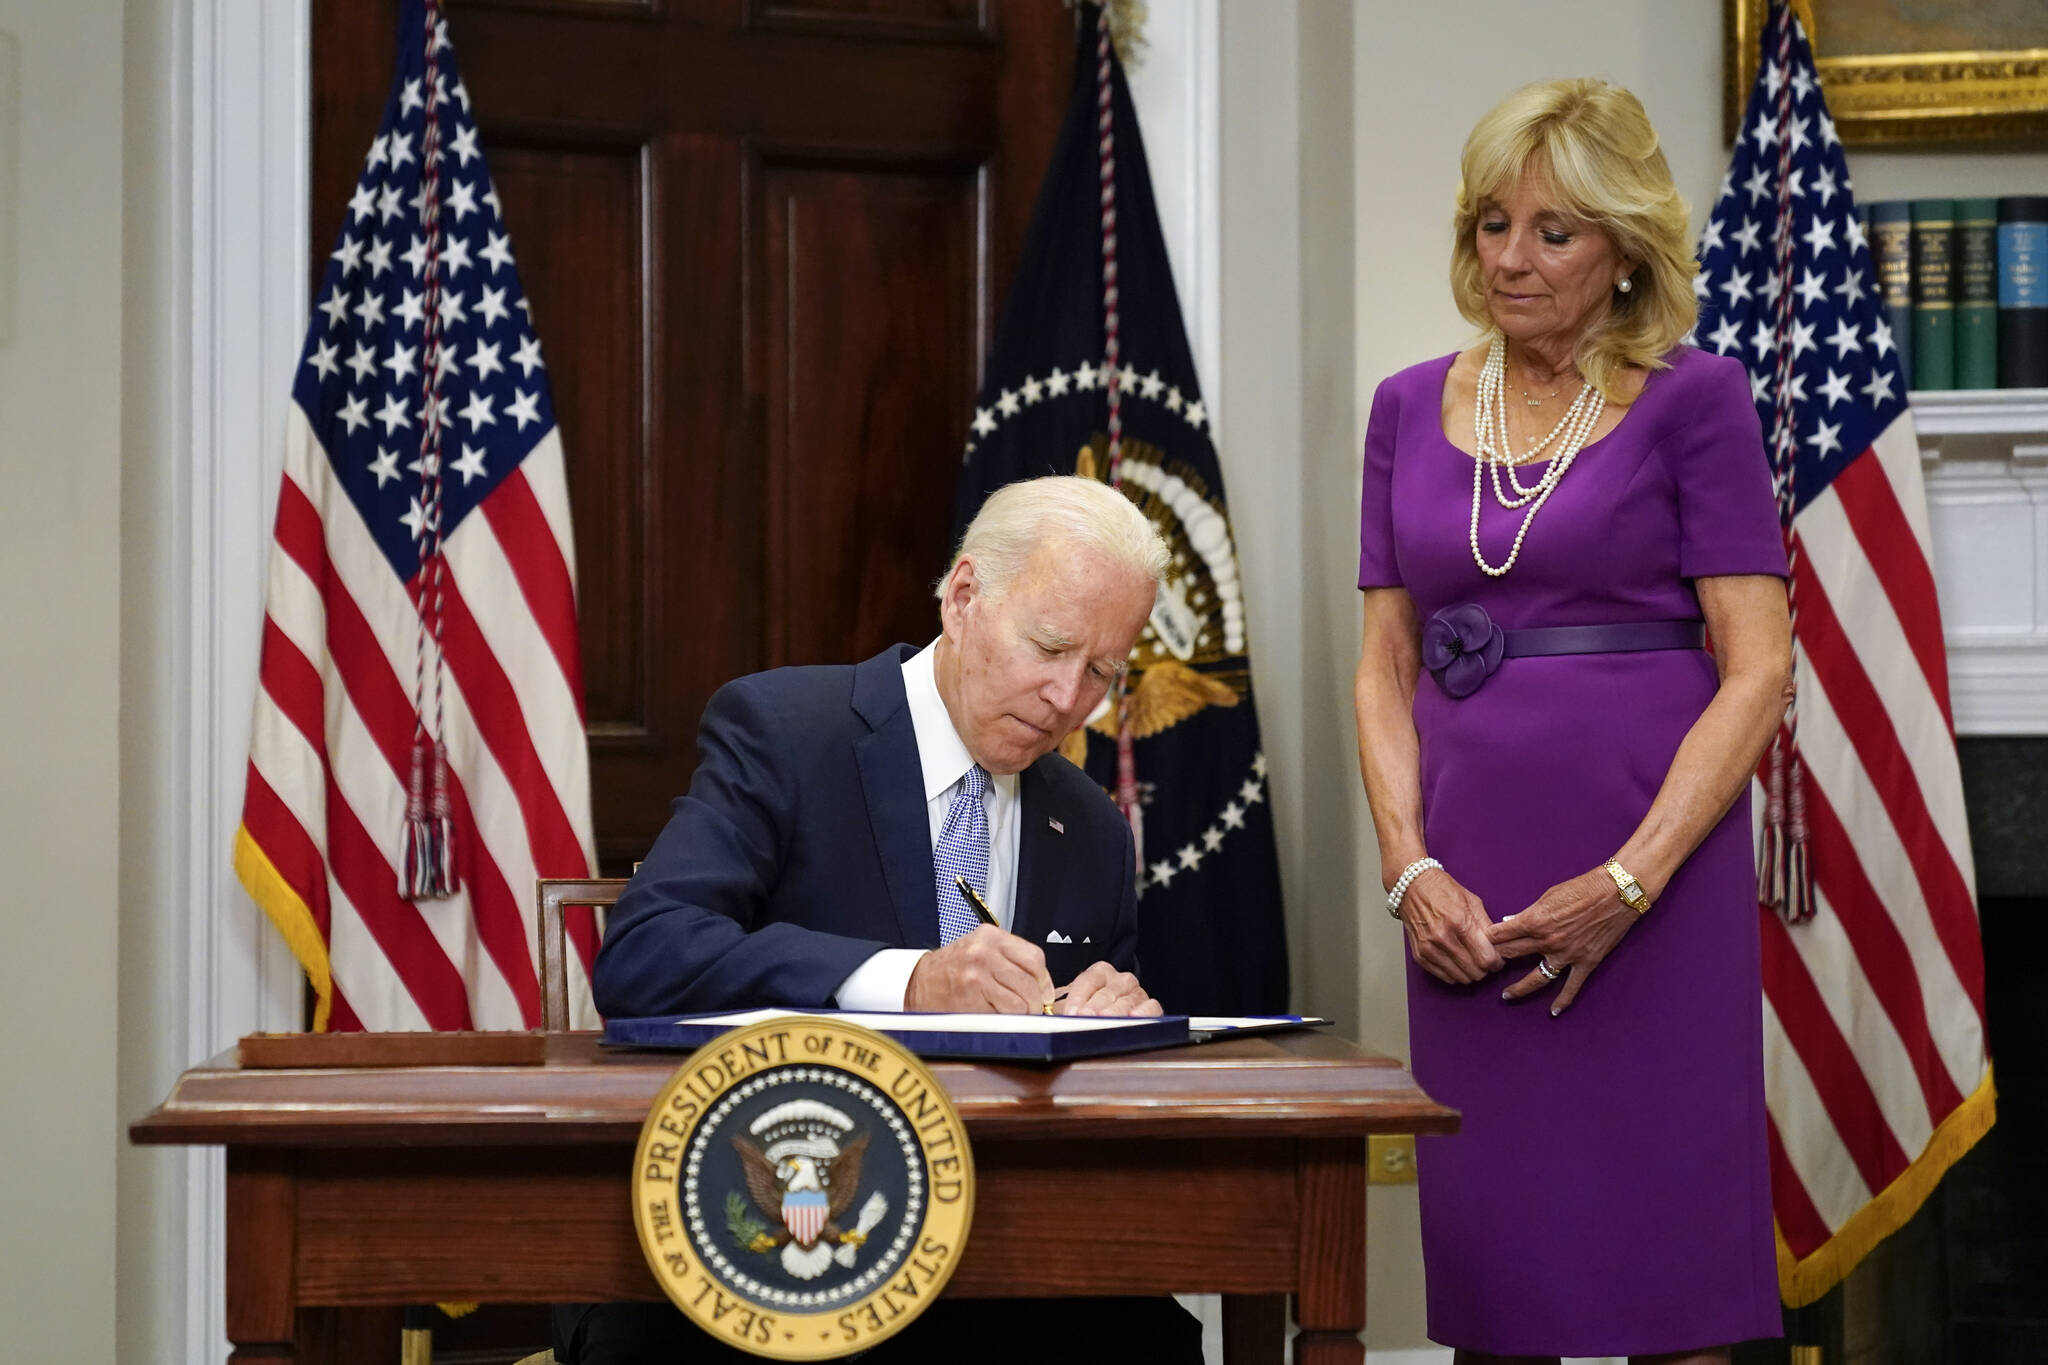 President Joe Biden signs into law S. 2938, the Bipartisan Safer Communities Act gun safety bill, in the Roosevelt Room of the White House in Washington, Saturday, June 25, 2022. First lady Jill Biden looks on at right. (AP Photo / Pablo Martinez Monsivais)